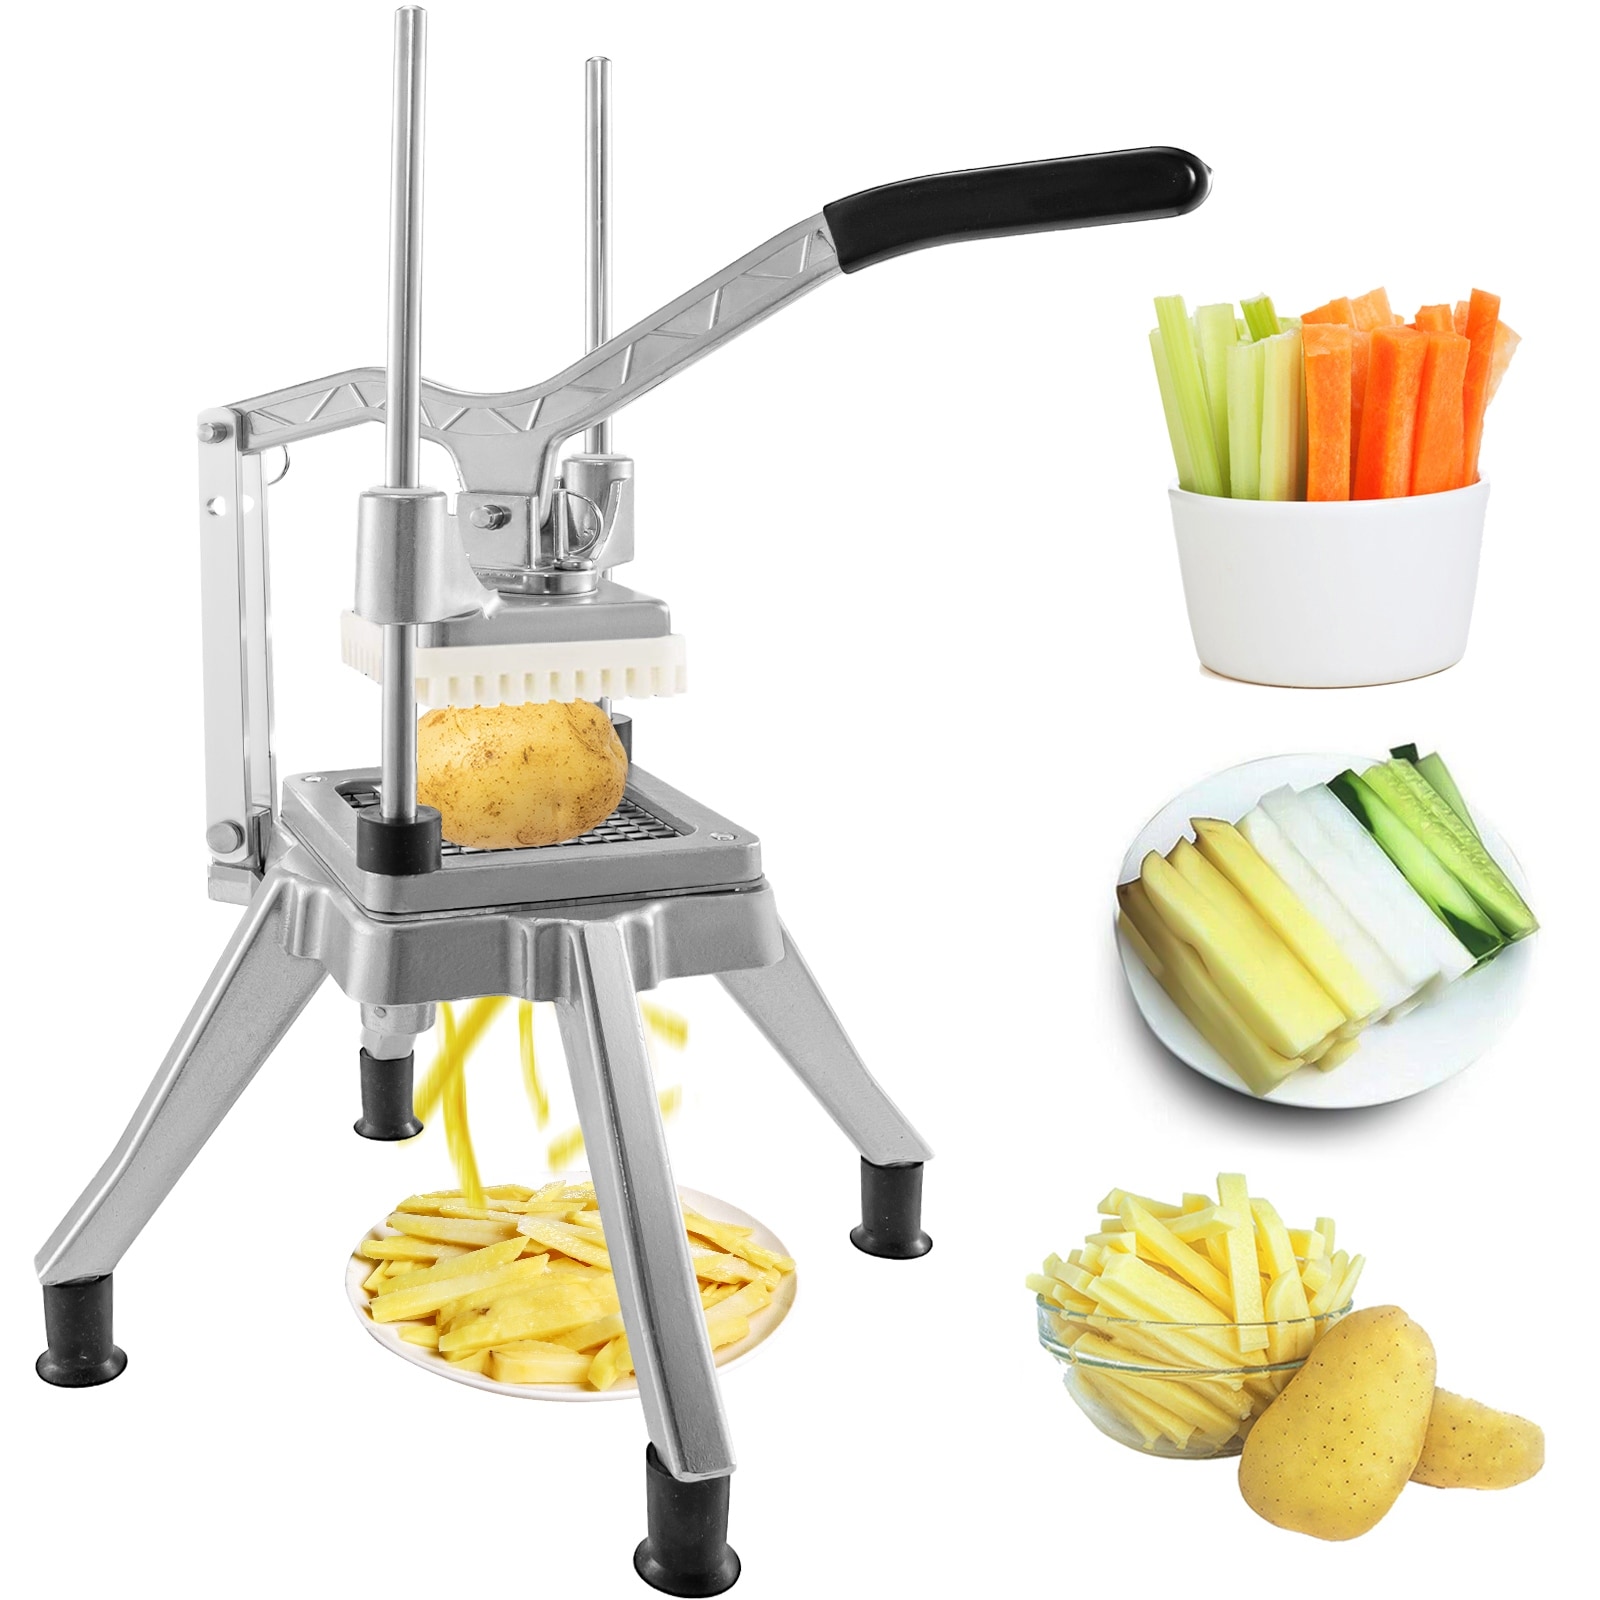 https://ak1.ostkcdn.com/images/products/is/images/direct/180283cfed55b2be4184f8630d07a93810db94b6/VEVOR-Commercial-Vegetable-Dicer-Fruit-Dicer-3-8-Inch-Food-Chopper-w-Handle-SUS.jpg